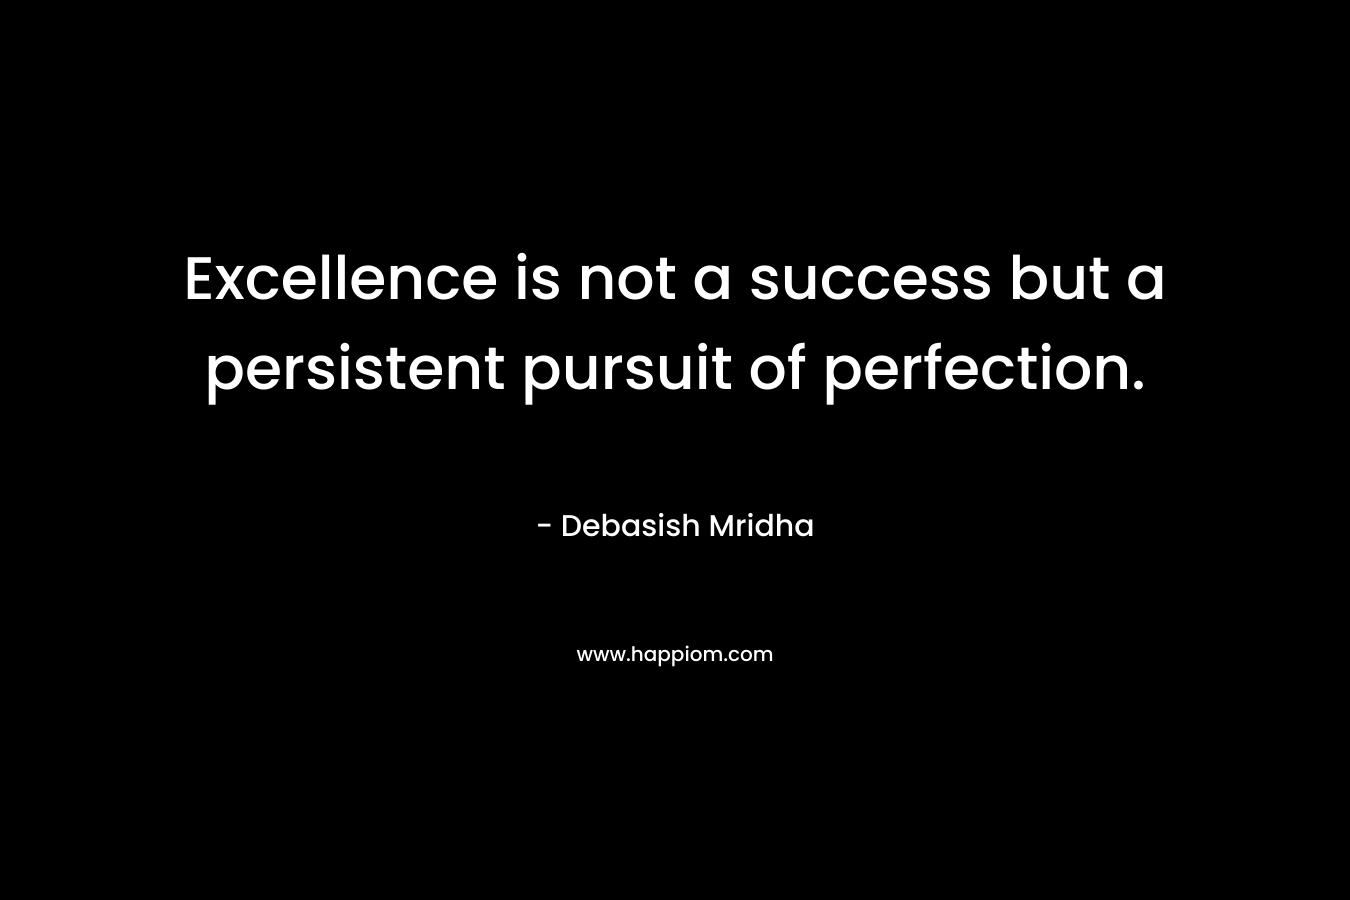 Excellence is not a success but a persistent pursuit of perfection.